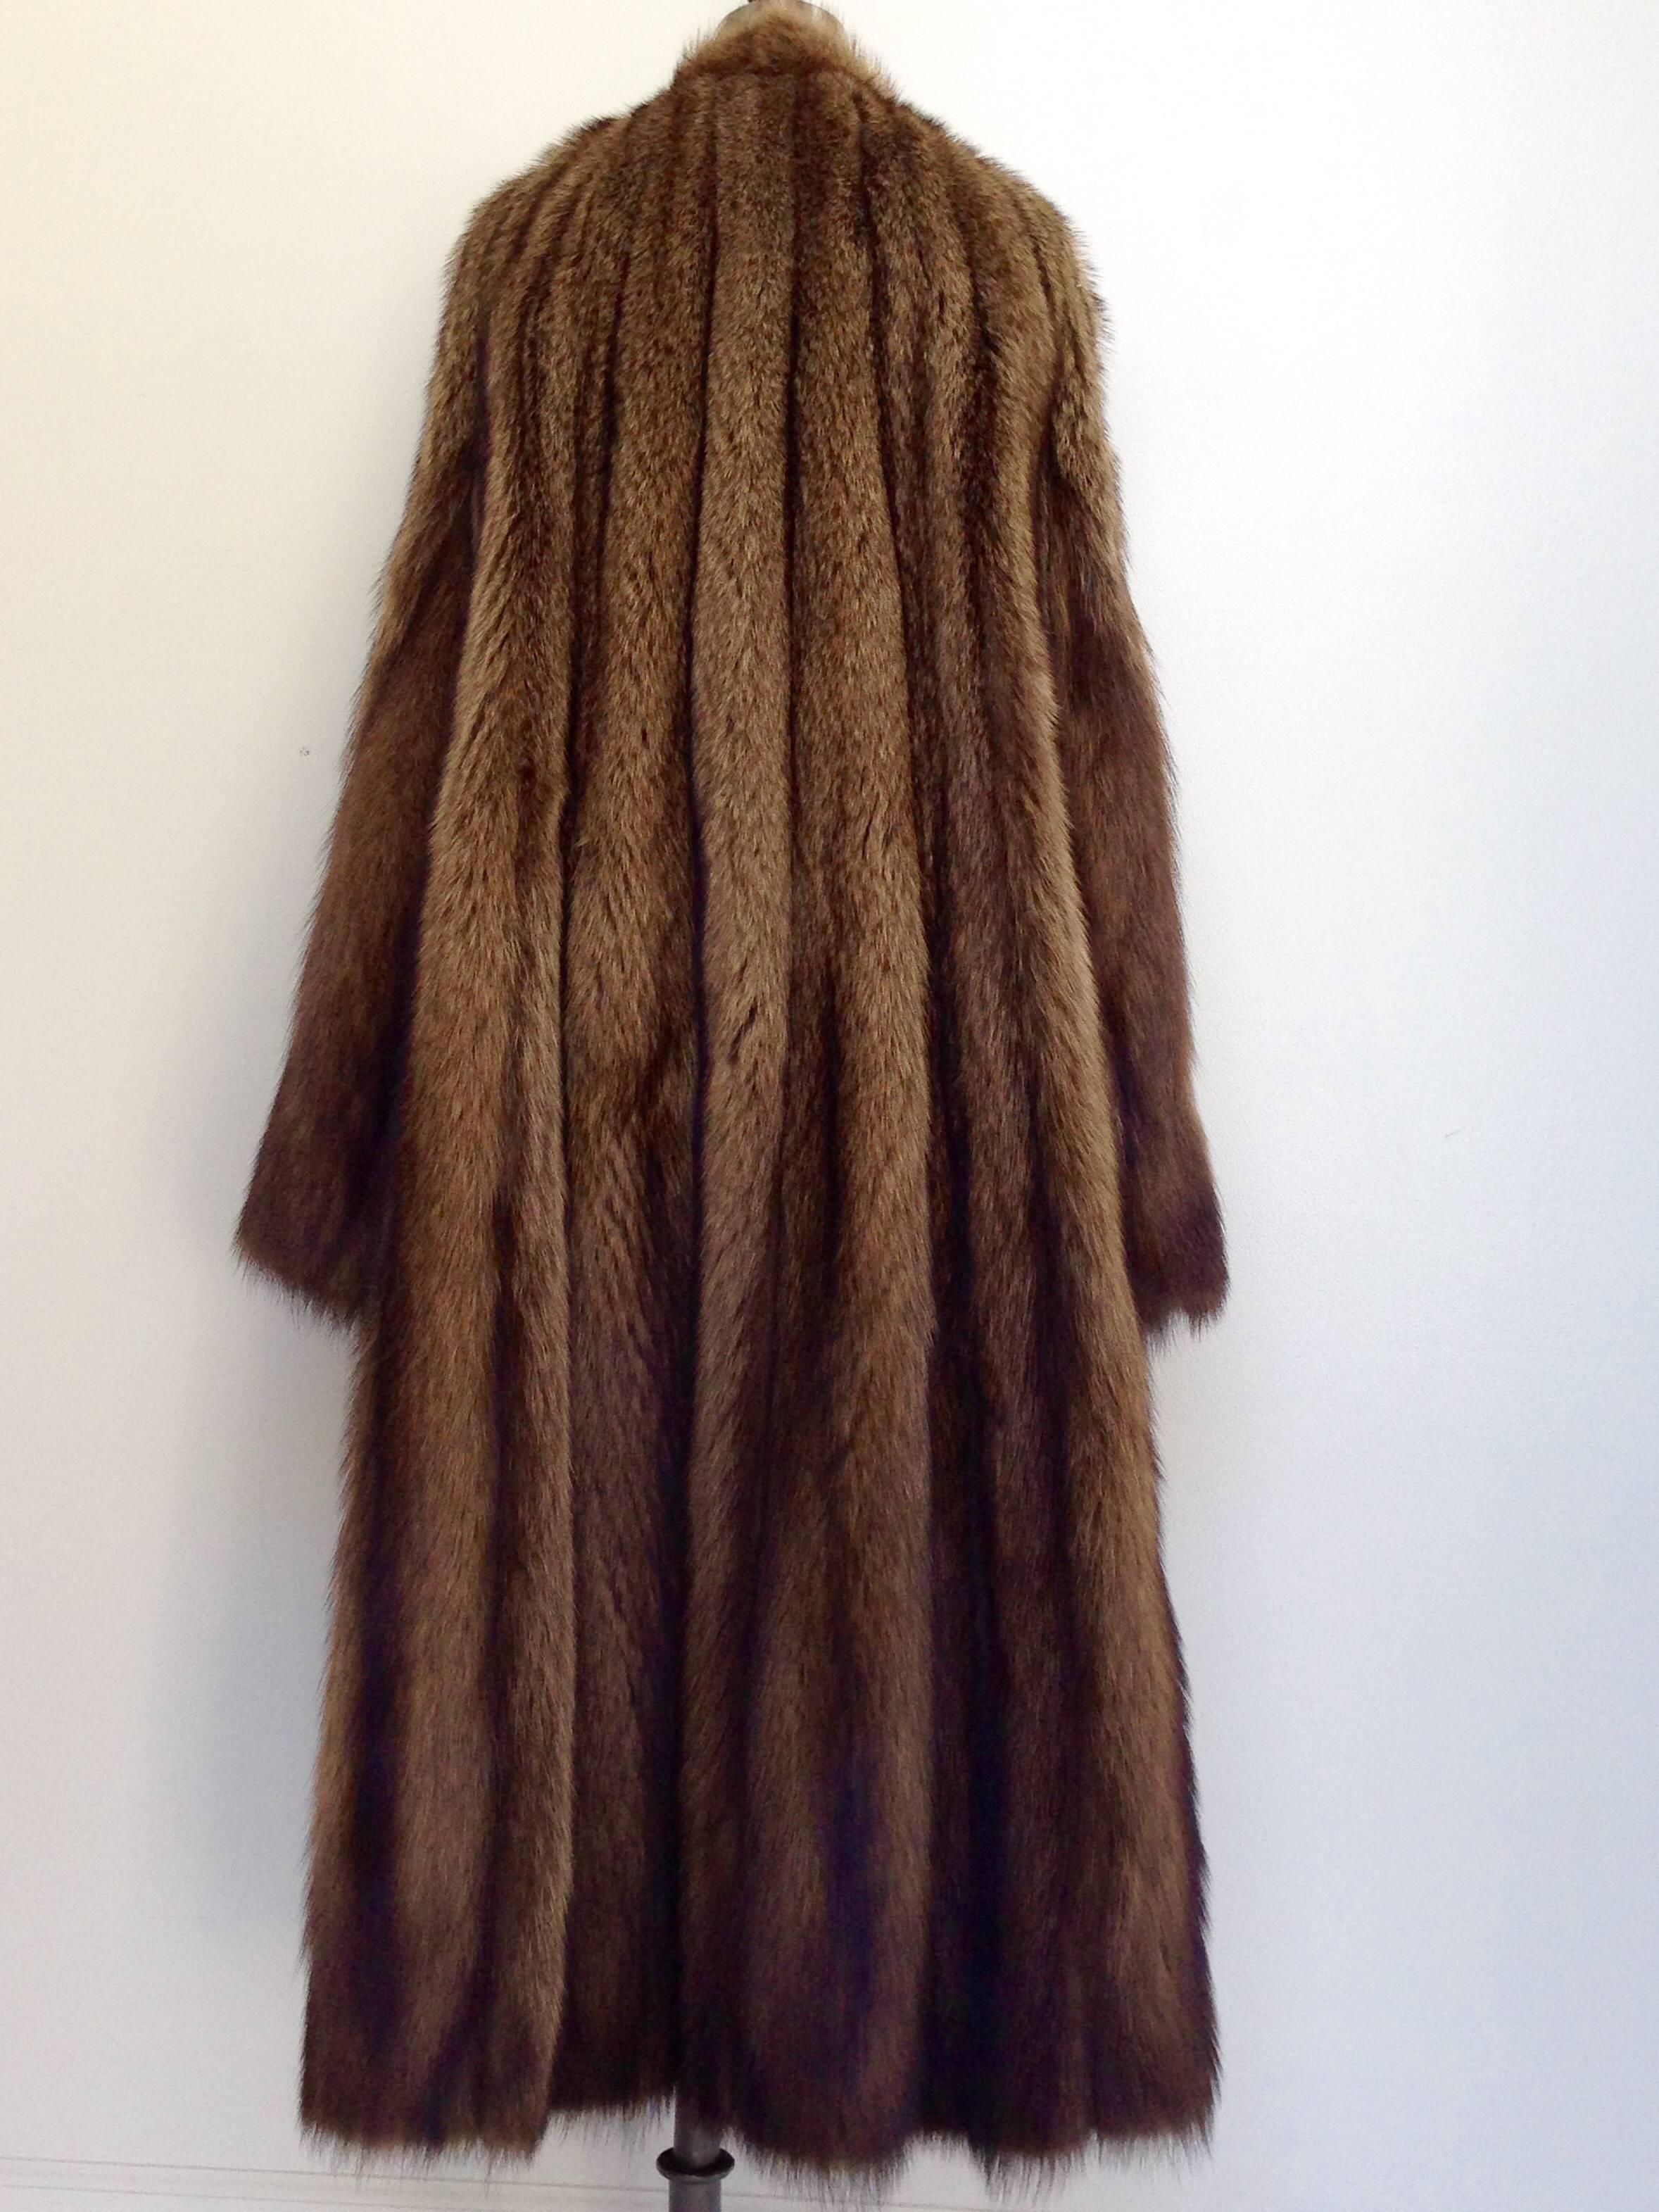 Magnificent full length Mink Coat by, Pierre Balmain, Paris. Custom made for client for, Mannus Furs, Beverly Hills-New York. Fully lined with four invisible toggle front closures. Fits like a medium-large. Billowy flared arm details with a billowy